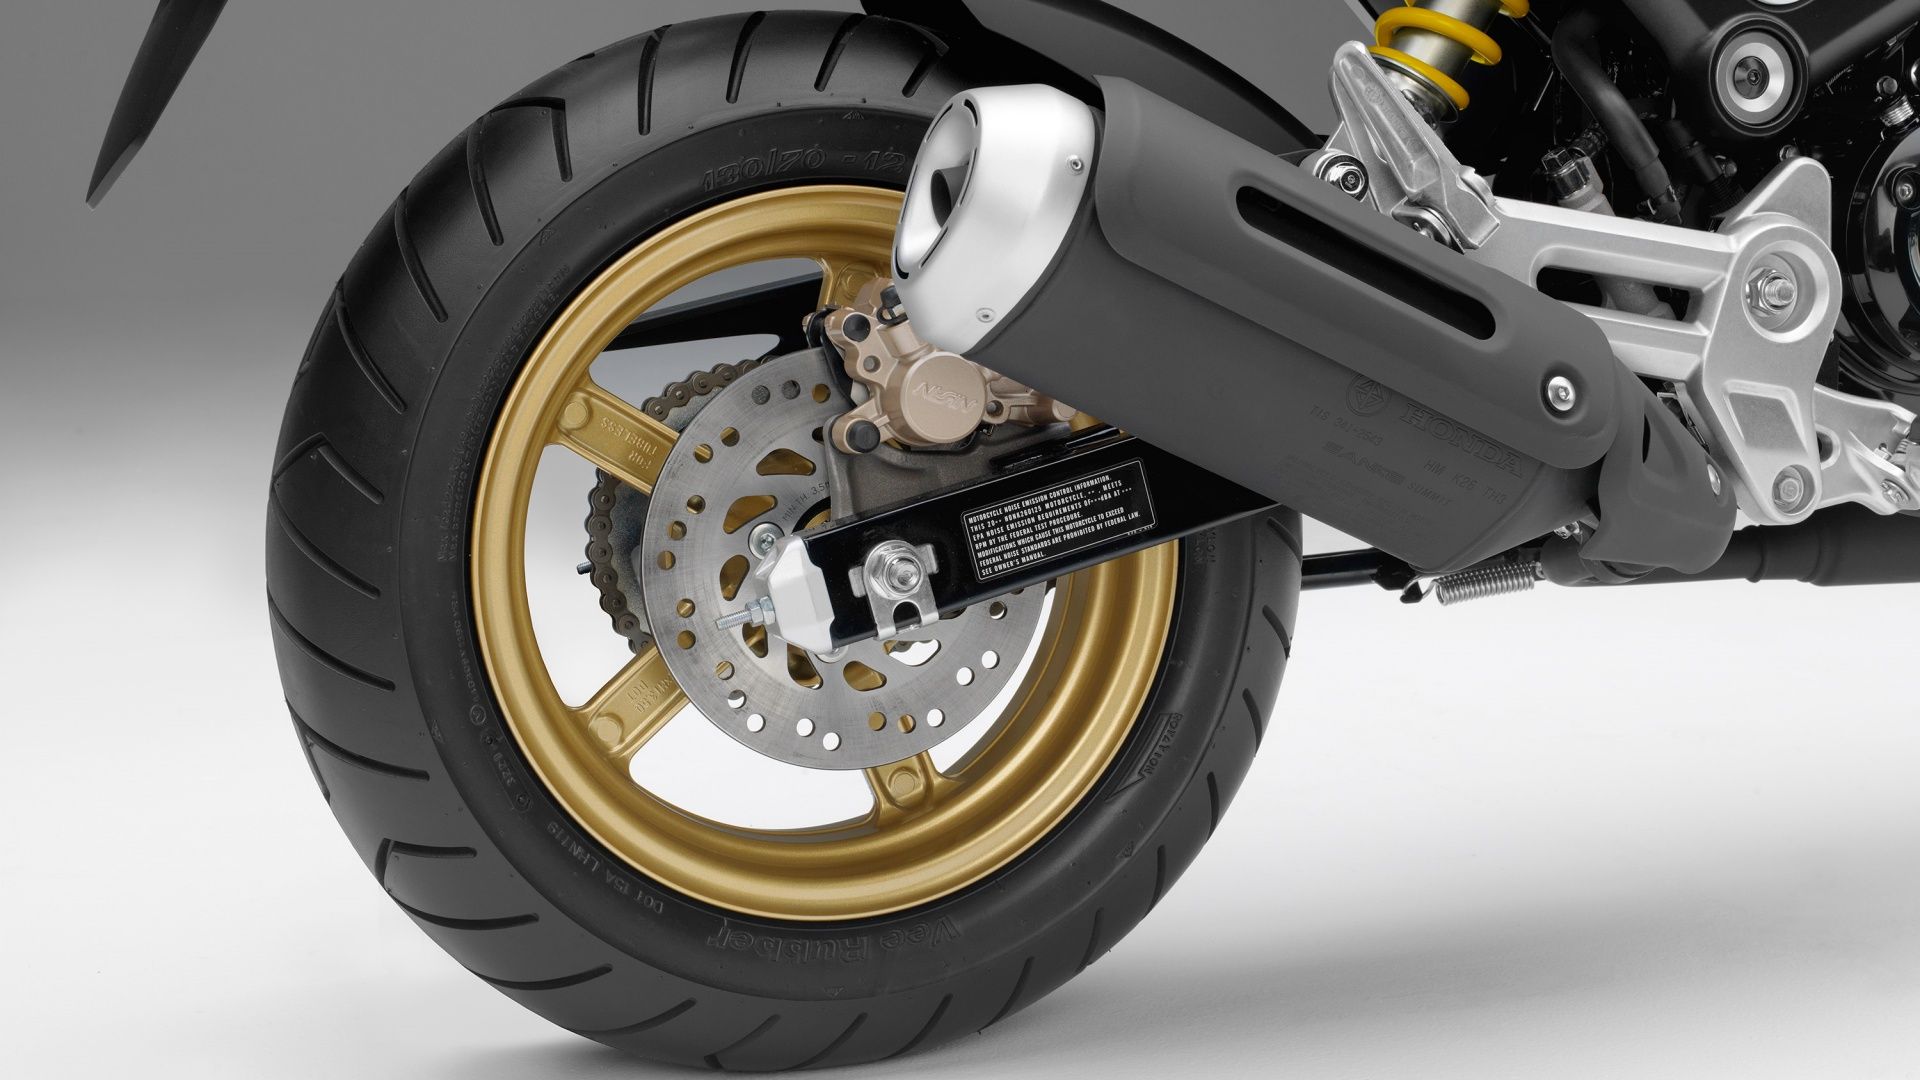 A close up shot of the 12 inch wheel of the Honda Grom